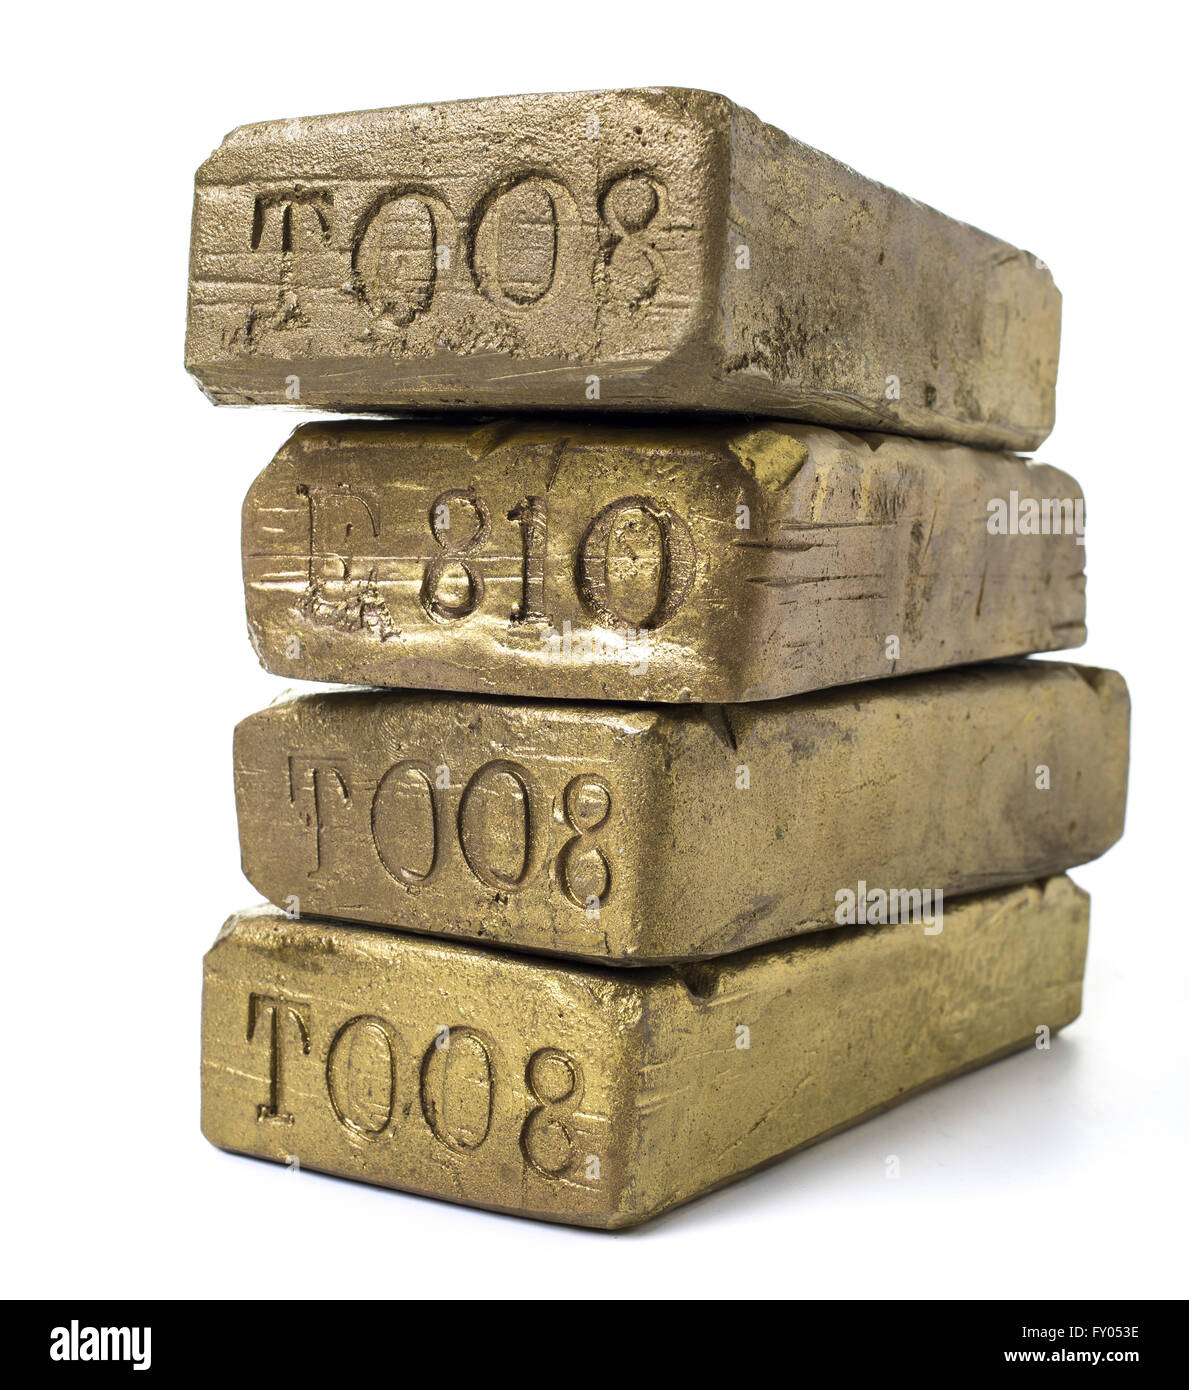 Stock image of a stack of gold bars the symbol of success. Stock Photo